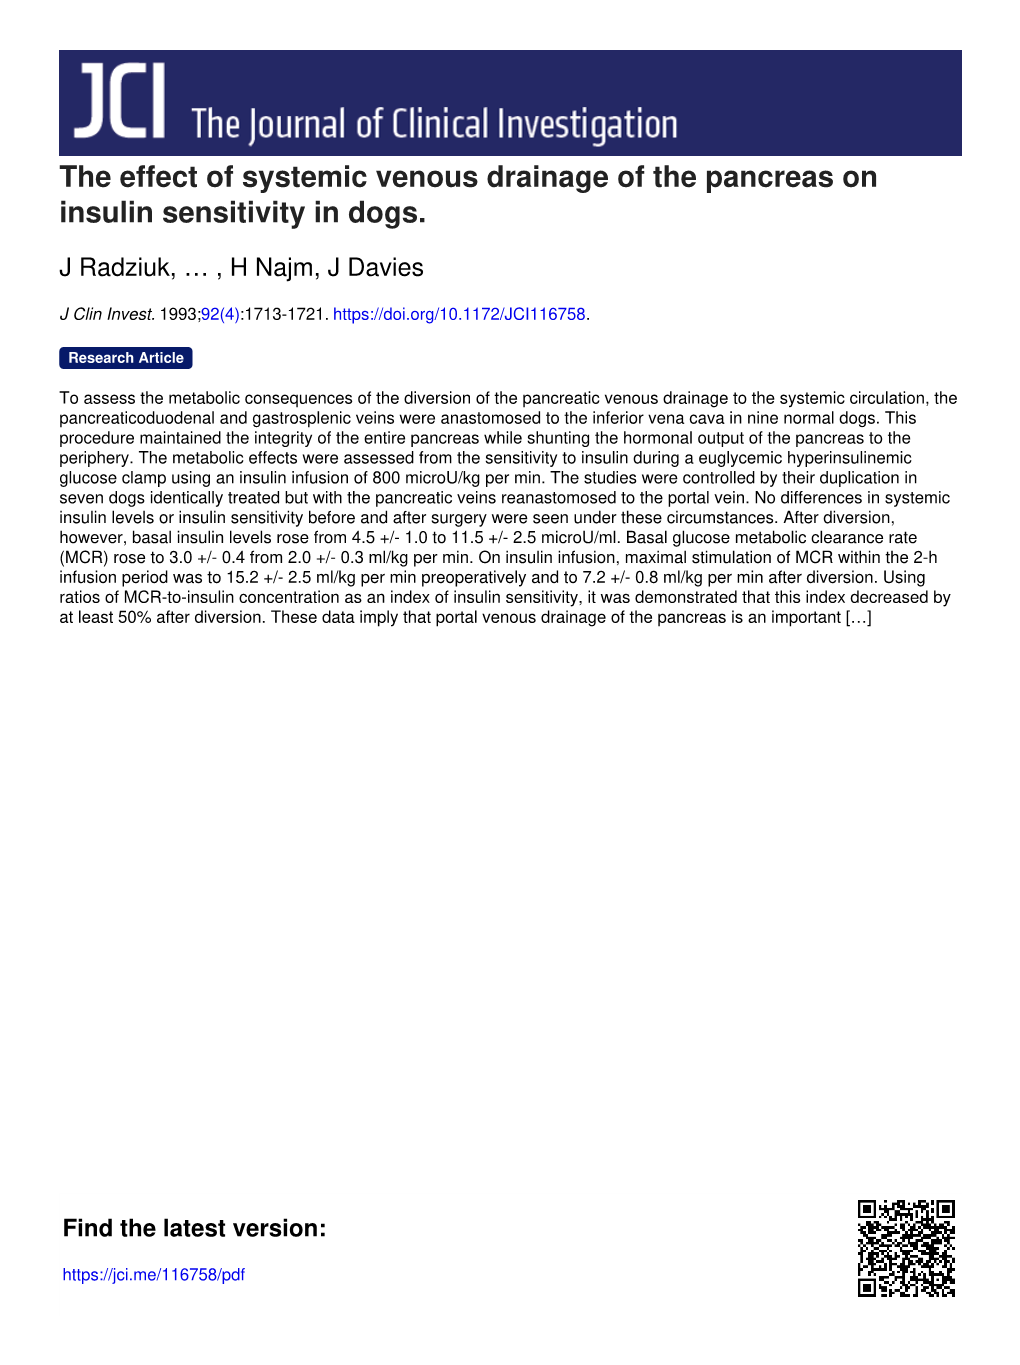 The Effect of Systemic Venous Drainage of the Pancreas on Insulin Sensitivity in Dogs